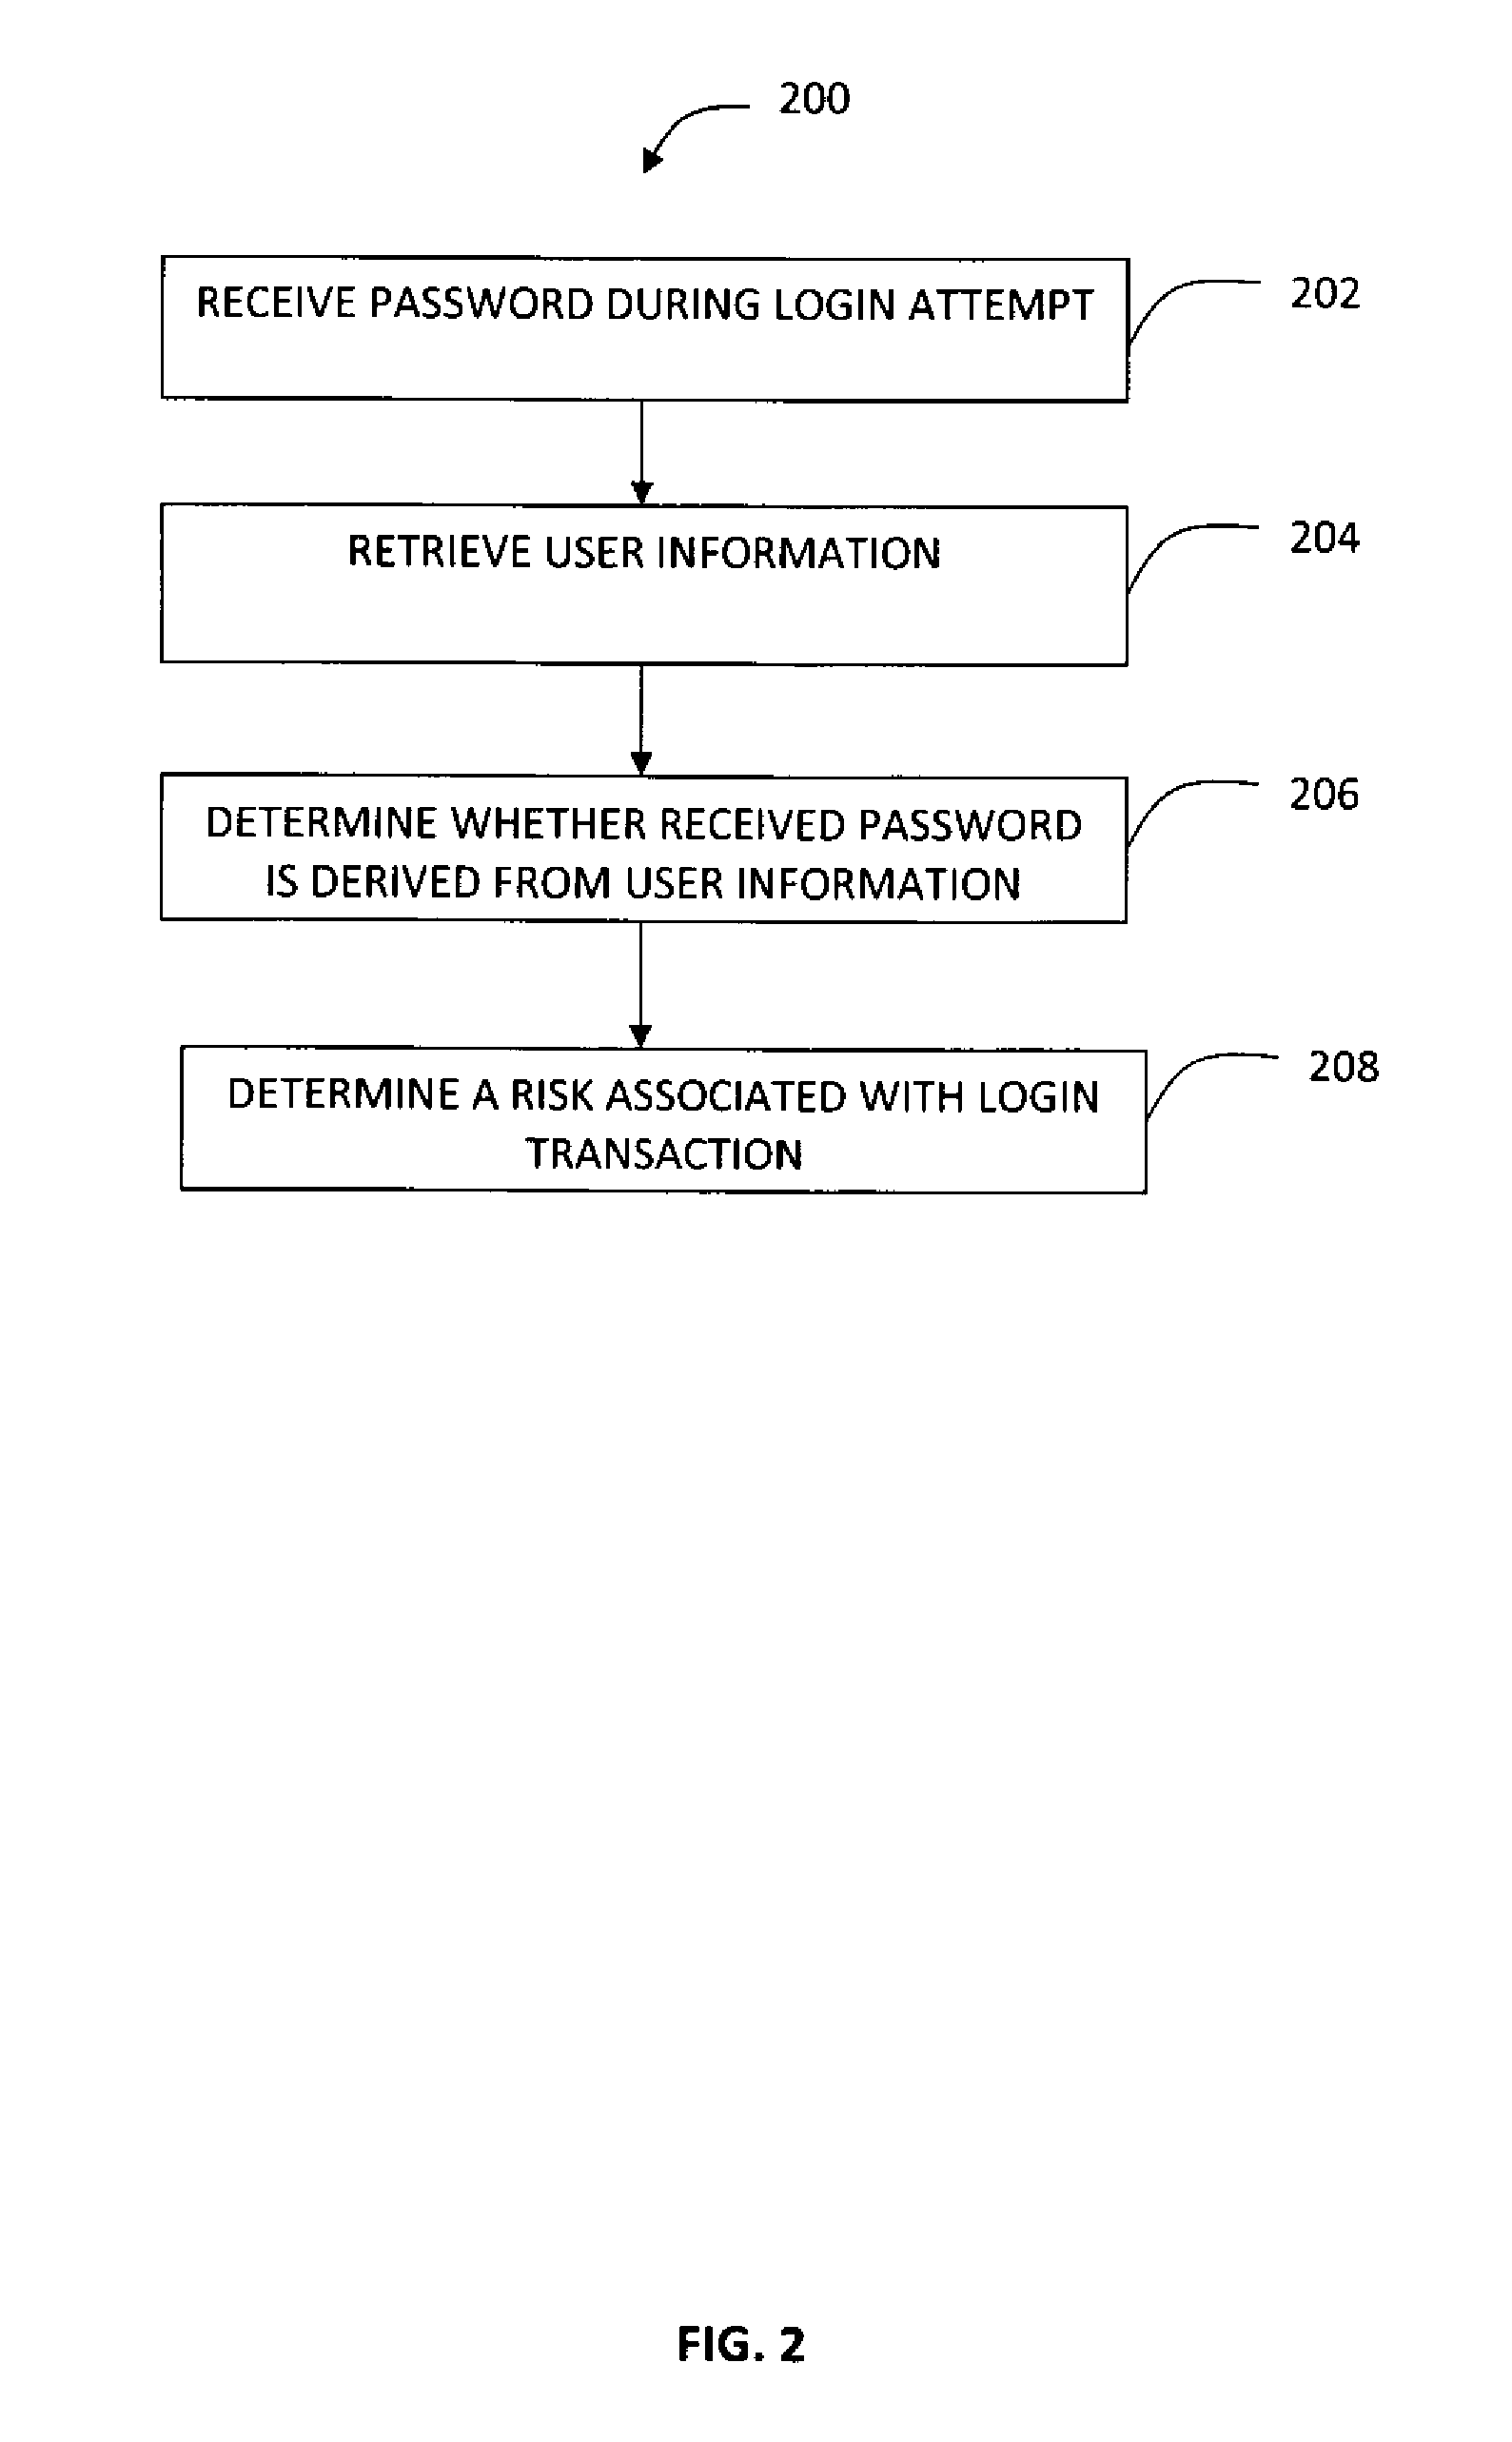 System and Method for Risk Assessment of Login Transactions Through Password Analysis